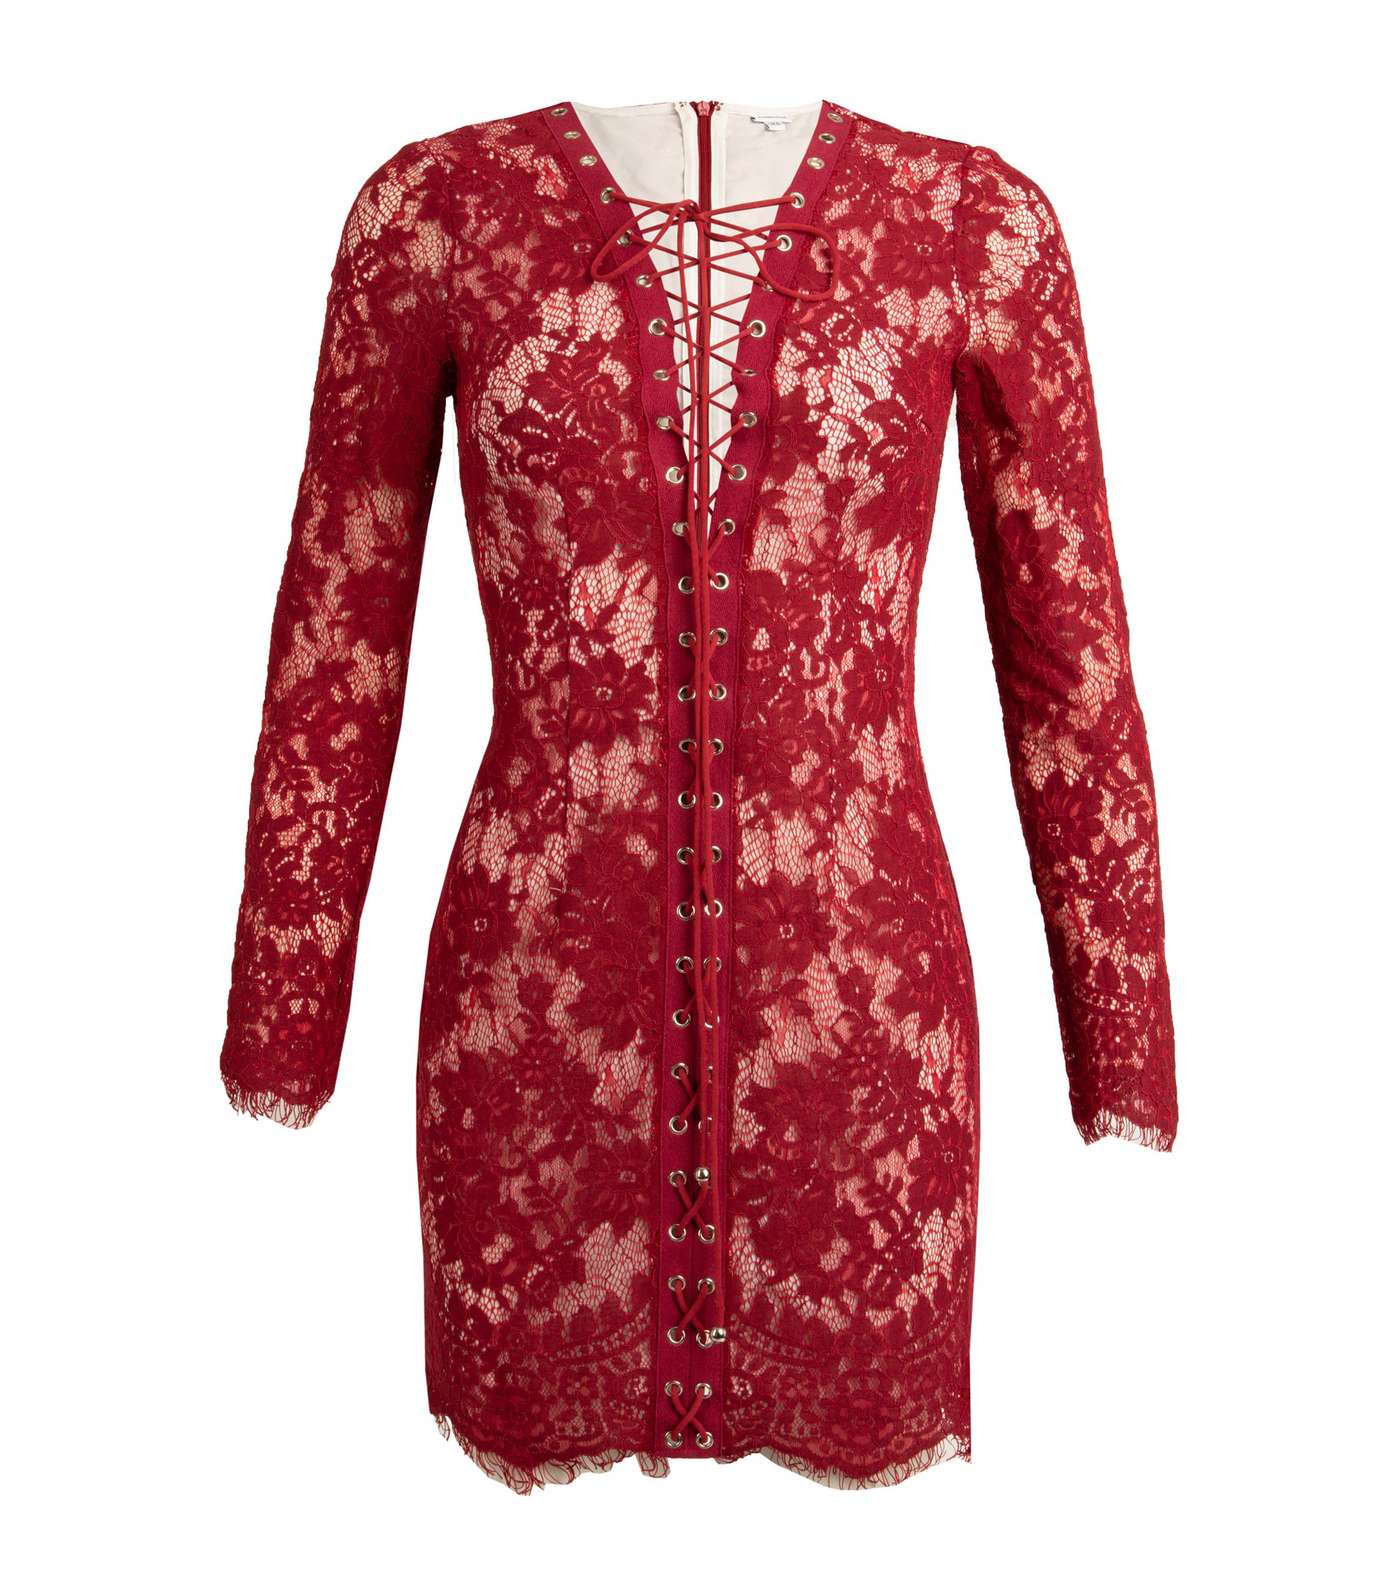 Love My Style Red Lace Long Sleeve Dress Image 4